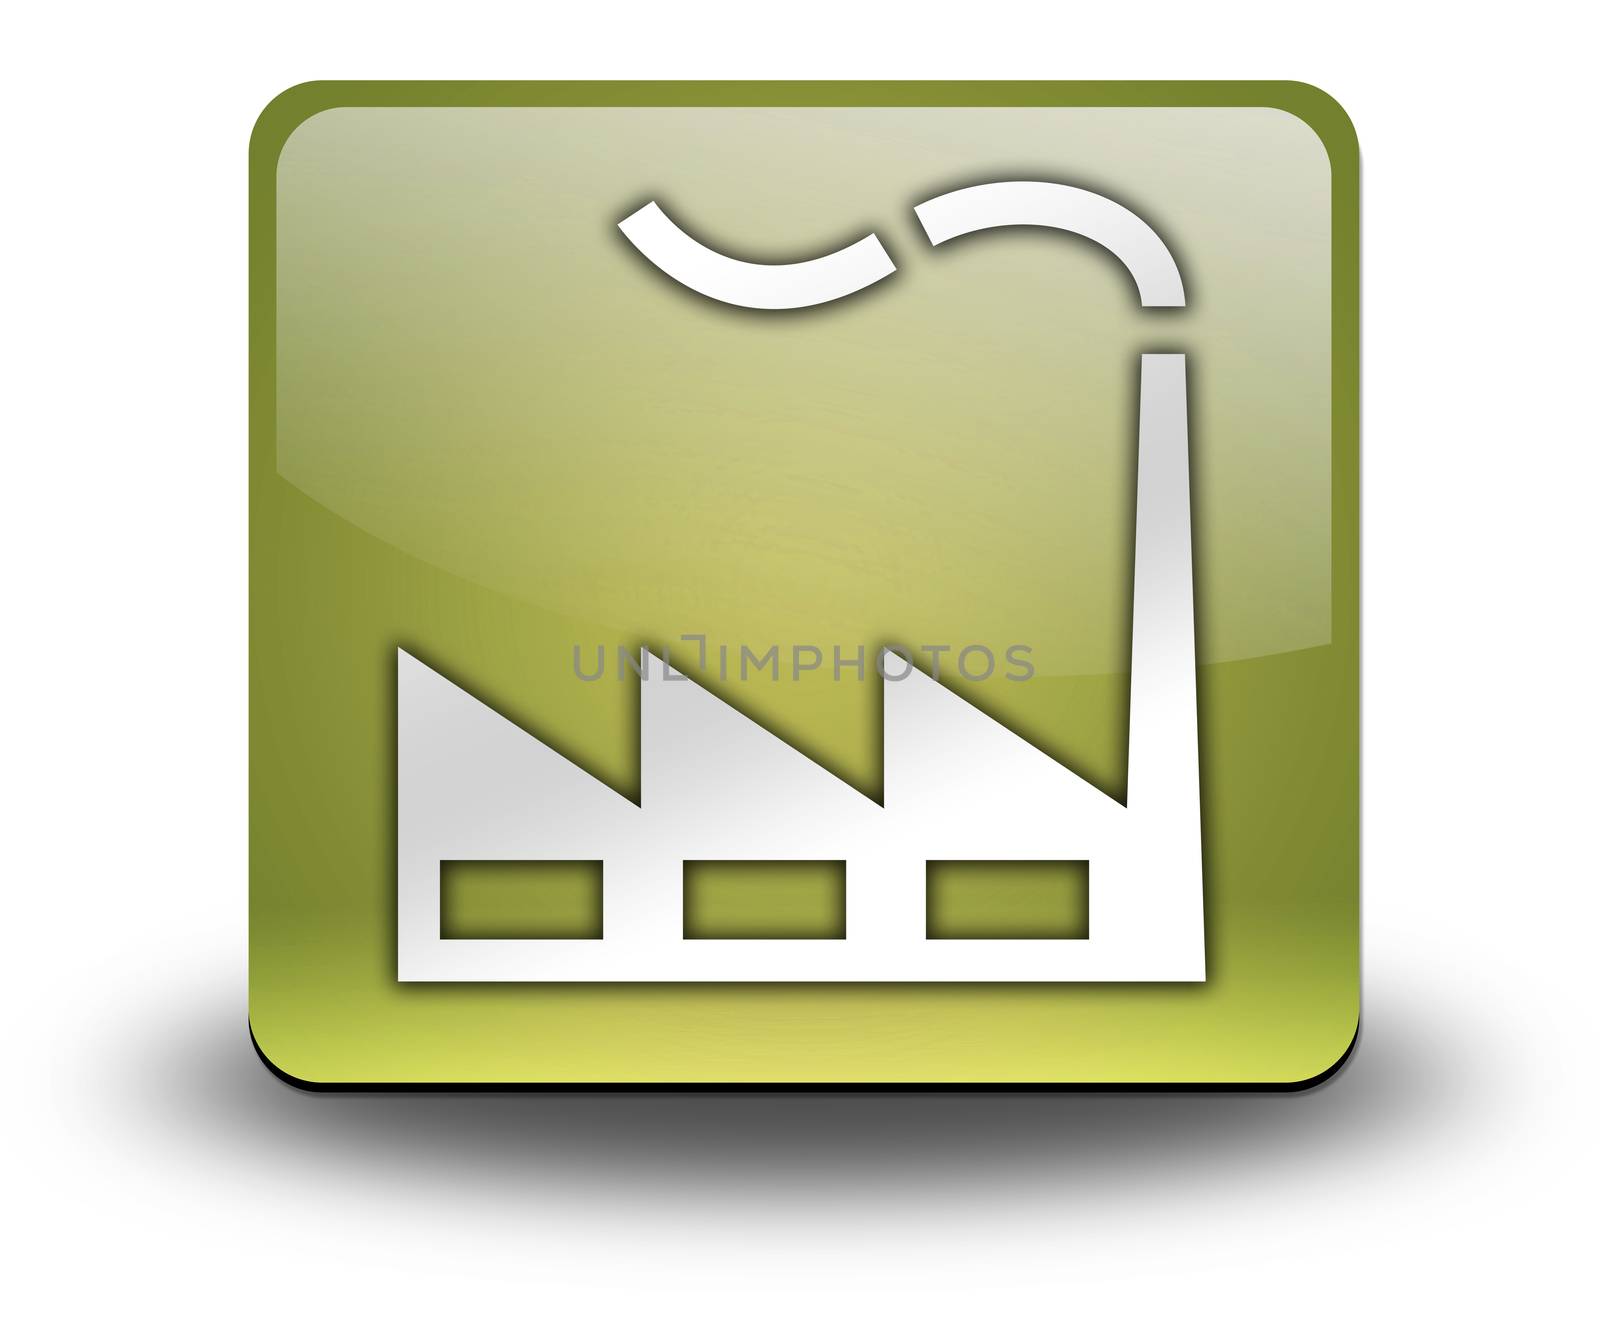 Icon, Button, Pictogram with Factory symbol